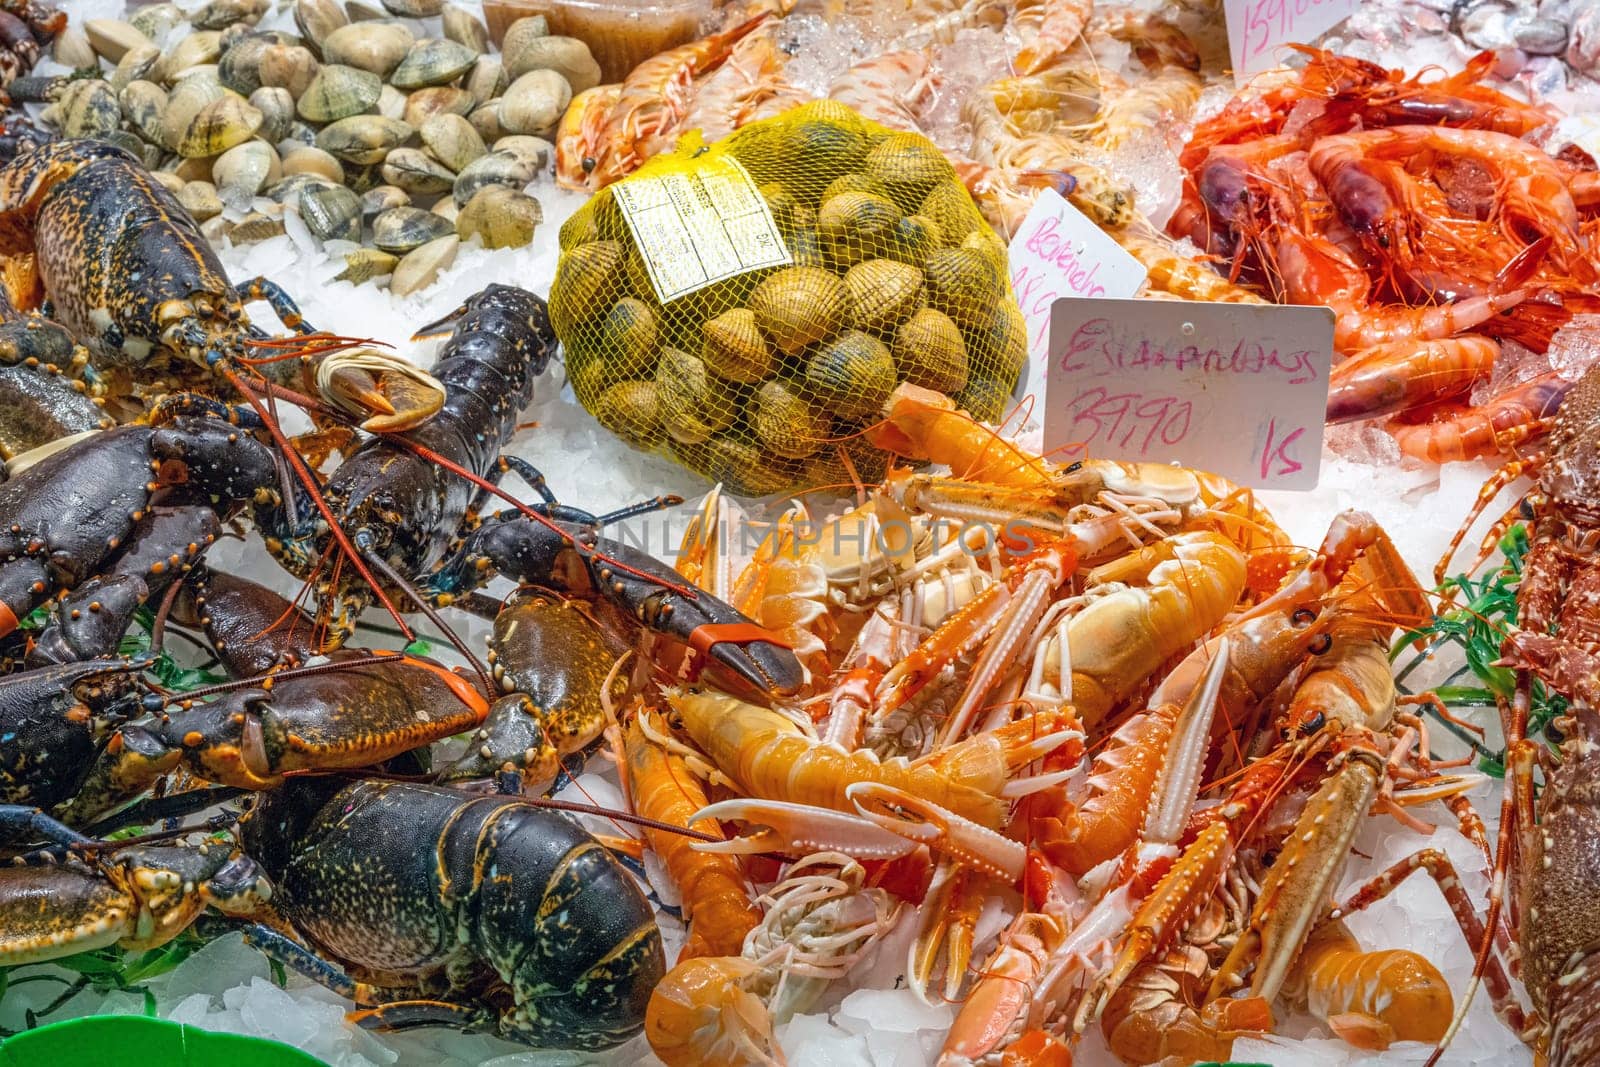 Lobsters and seafood for sale at a market in Barcelona, Spain